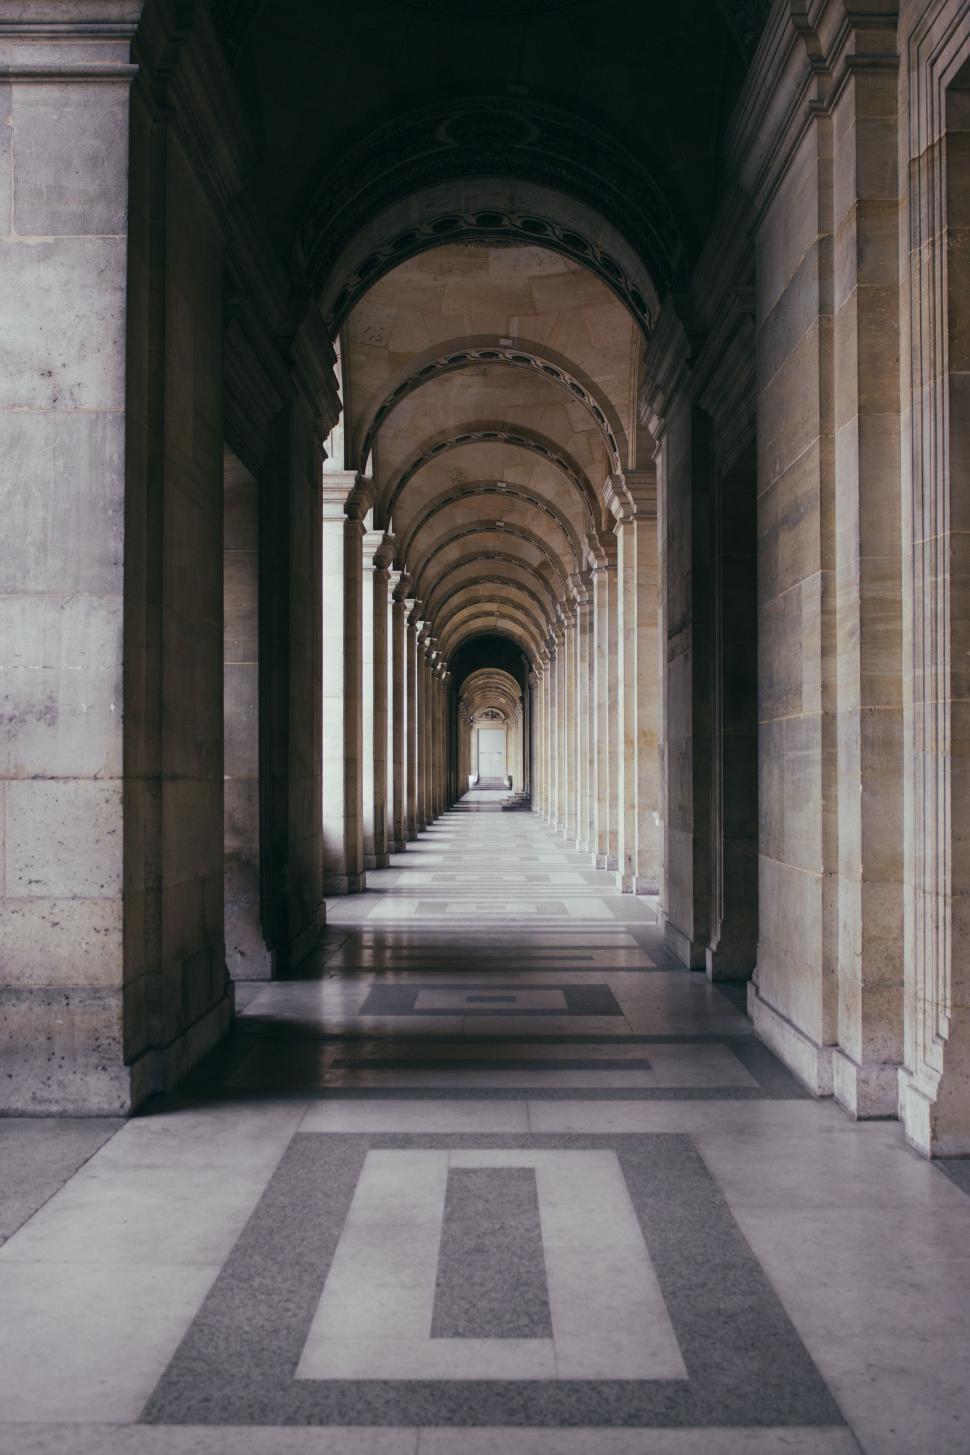 Free Image of Ancient Hallway With Columns and Arches 